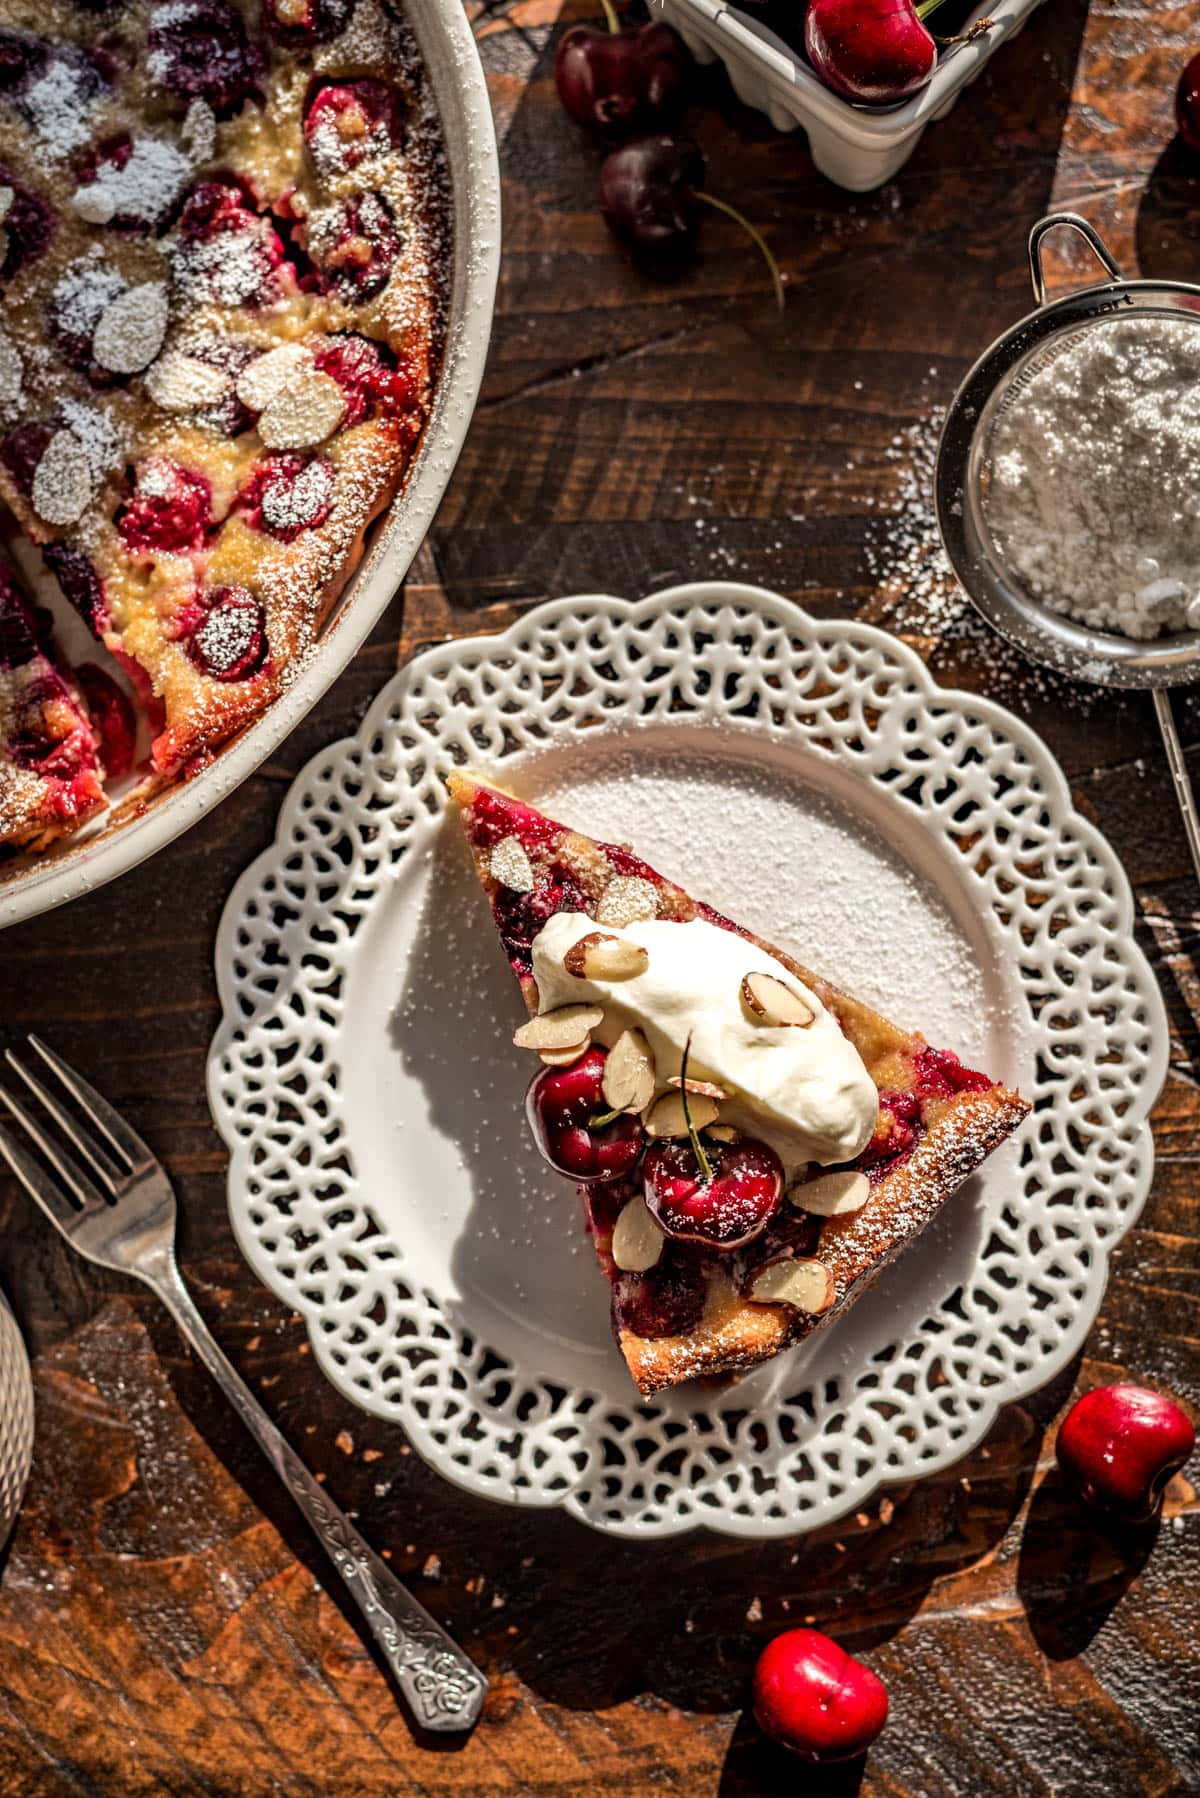 A slice of cherry clafoutis topped with fresh cherries, whipped cream, powdered sugar, and sliced almonds atop a lace-rimmed white plate, with a dish of baked clafoutis in the corner.